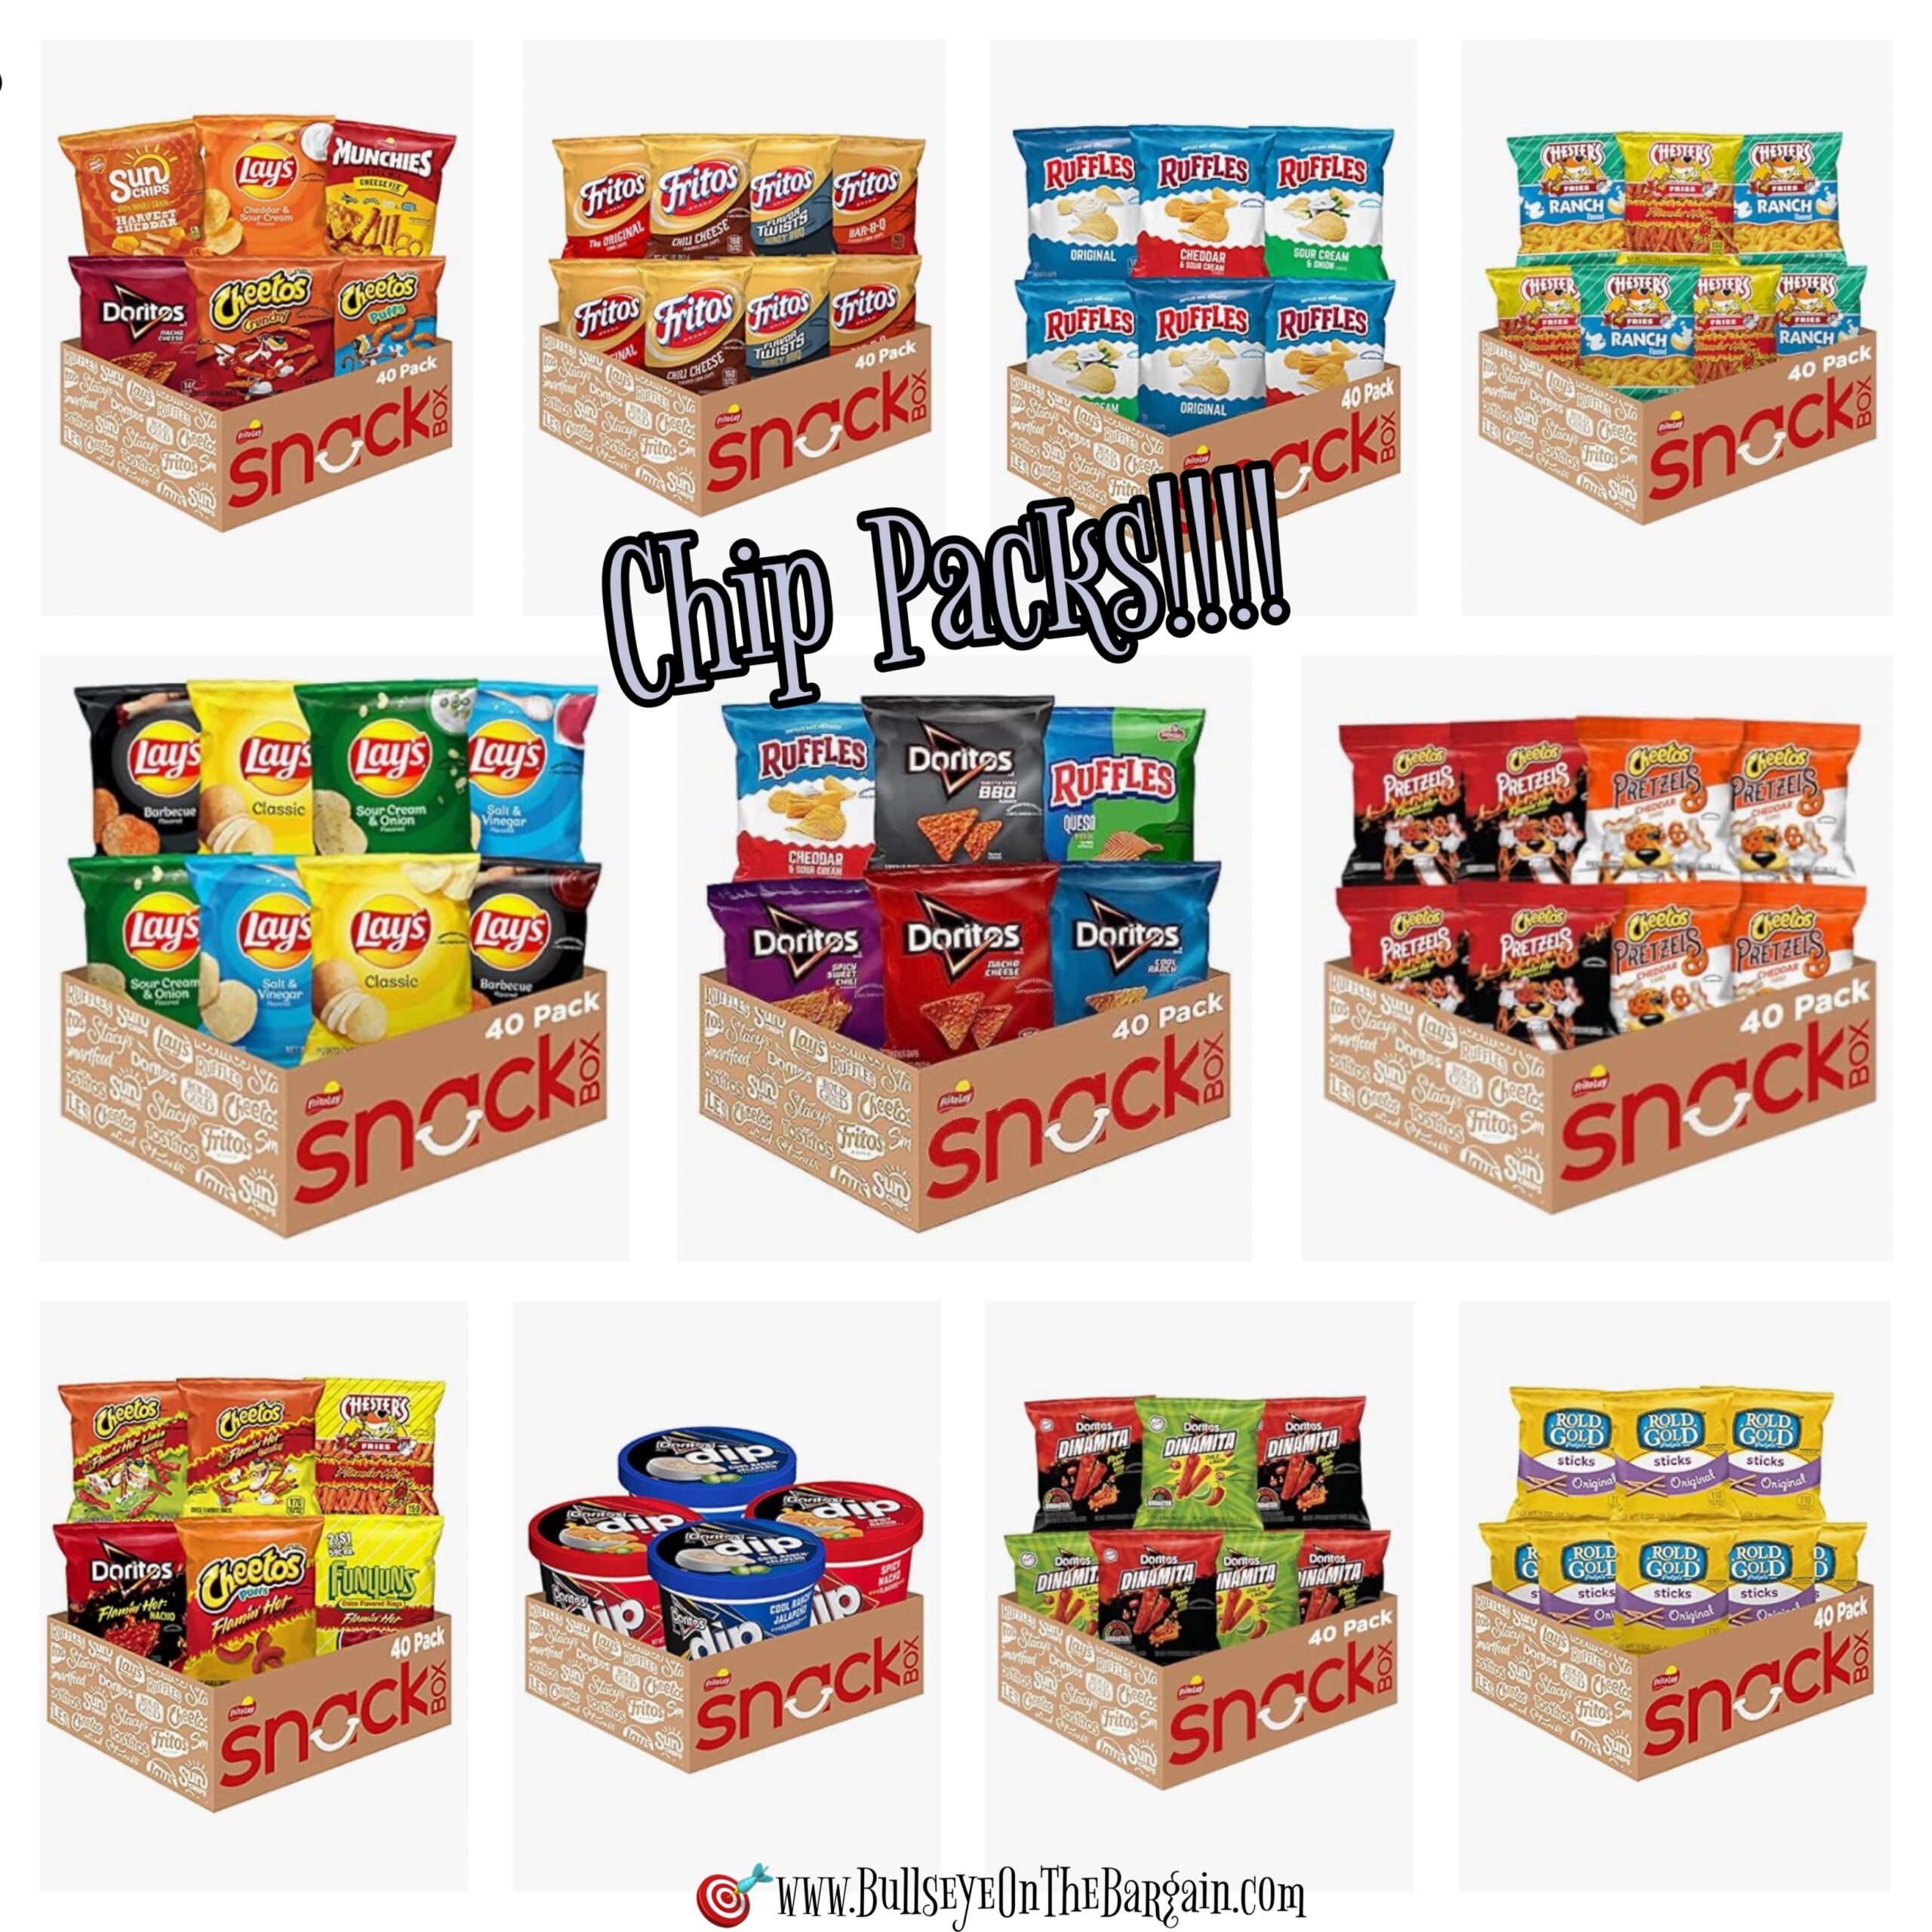 Snack-A-Palooza with Frito-Lay and Quaker Brands!